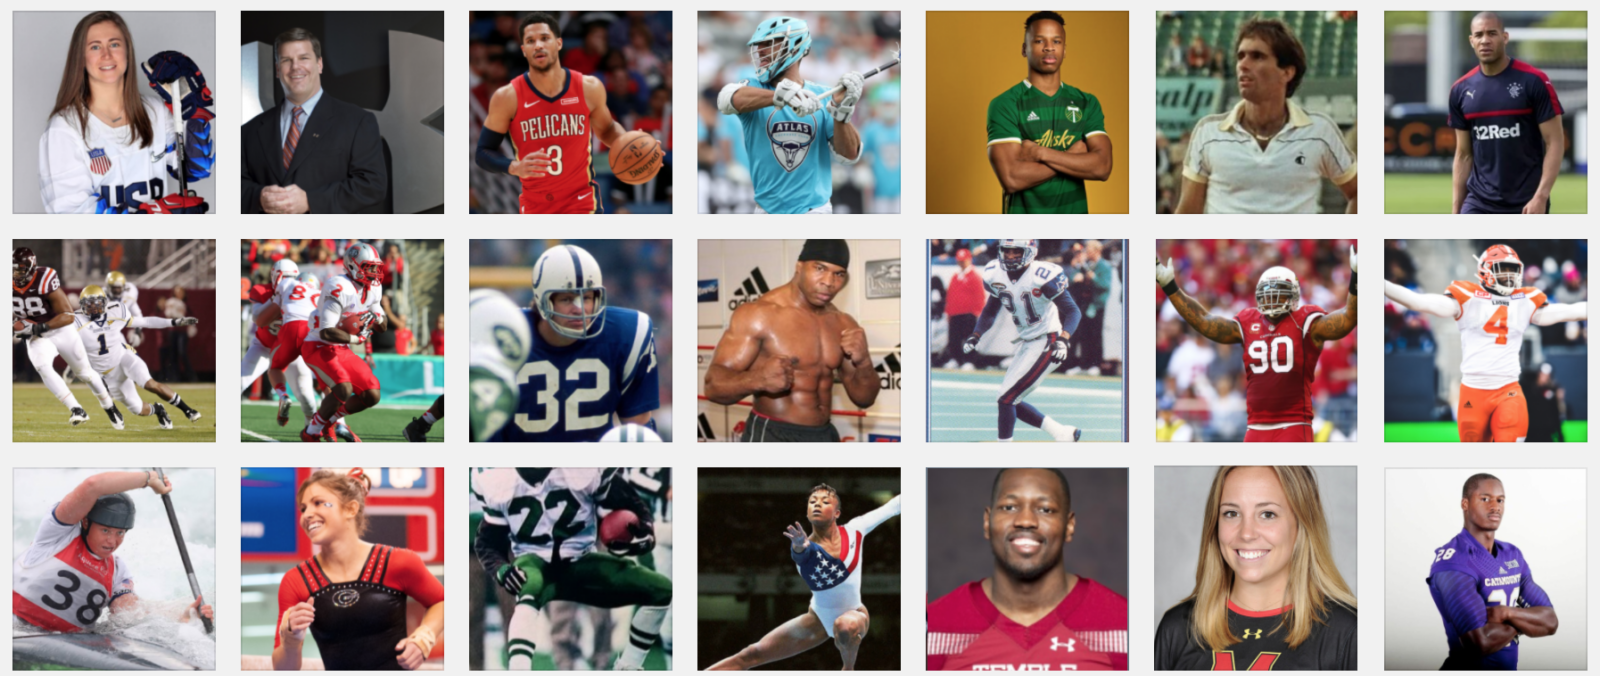 The Most Famous Athlete from Each MoCo High School - The MoCo Show